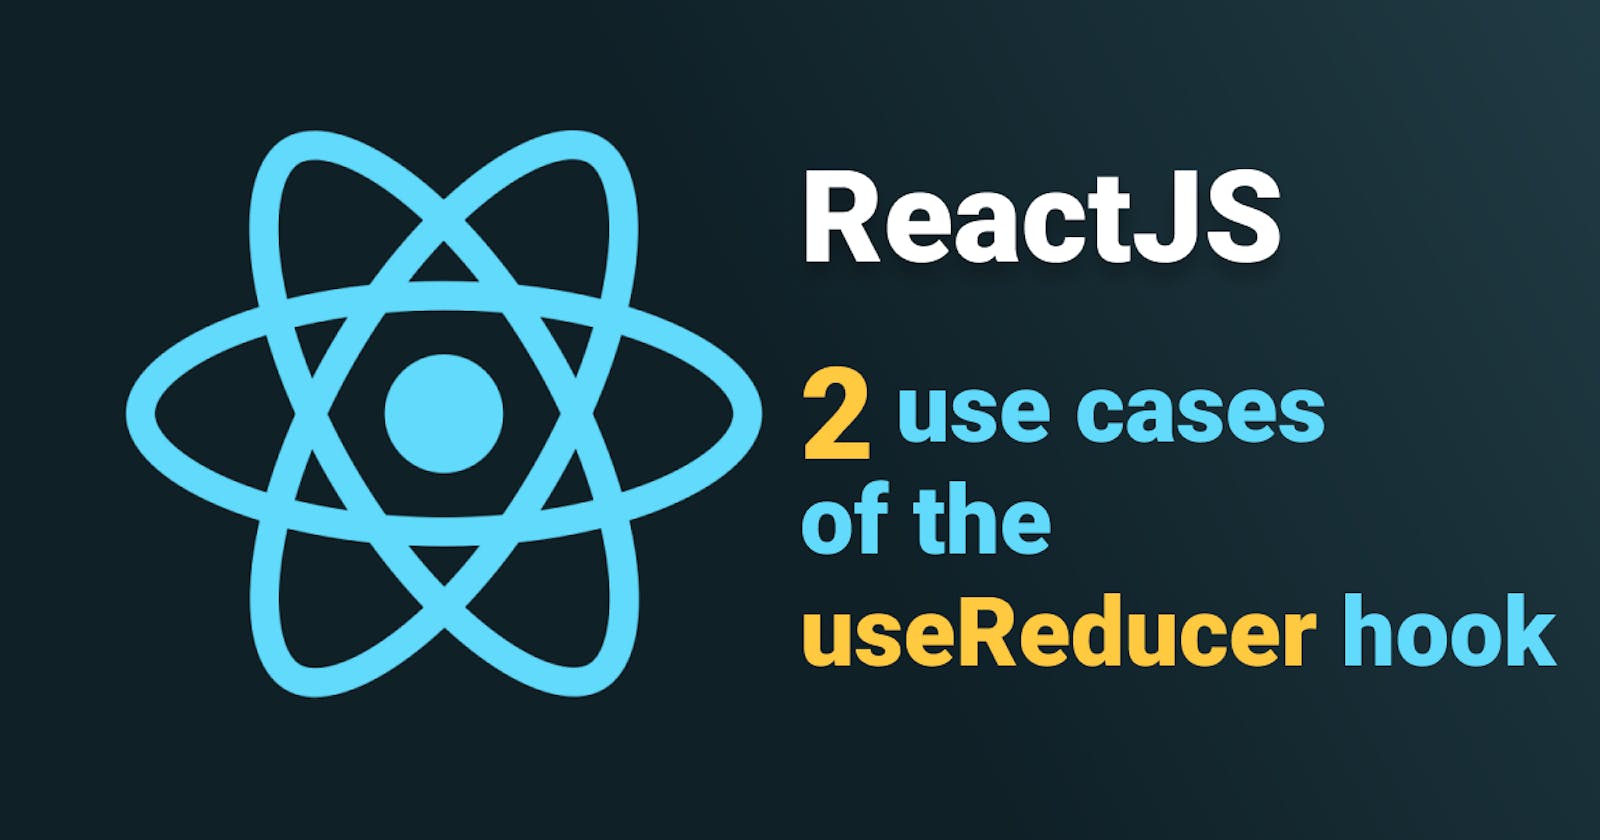 2 use cases of the useReducer ReactJS hook